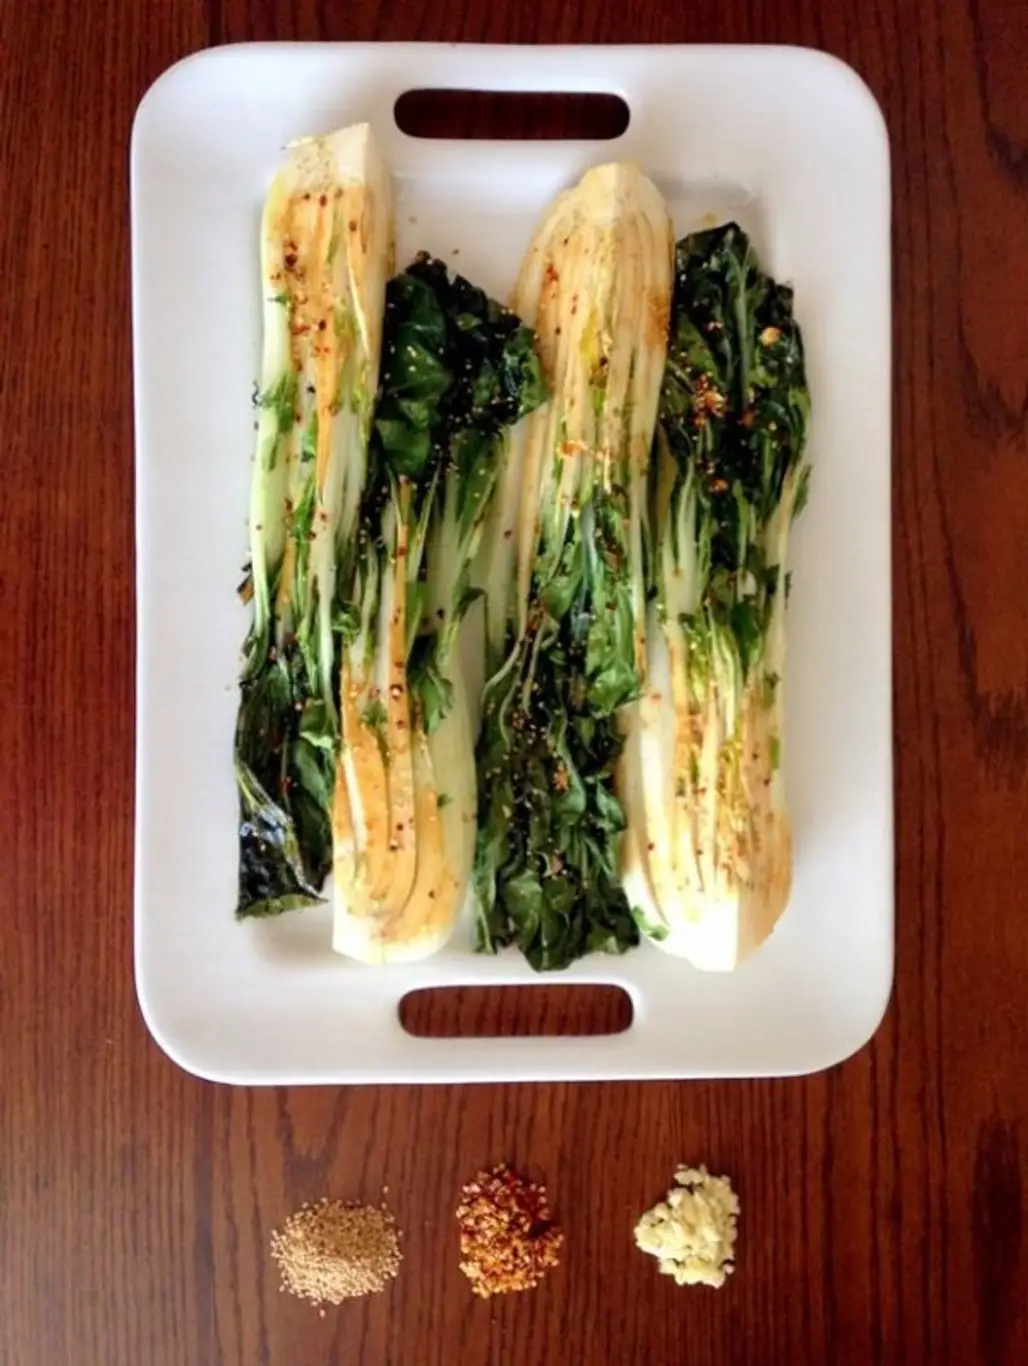 Spicy Roasted Bok Choy